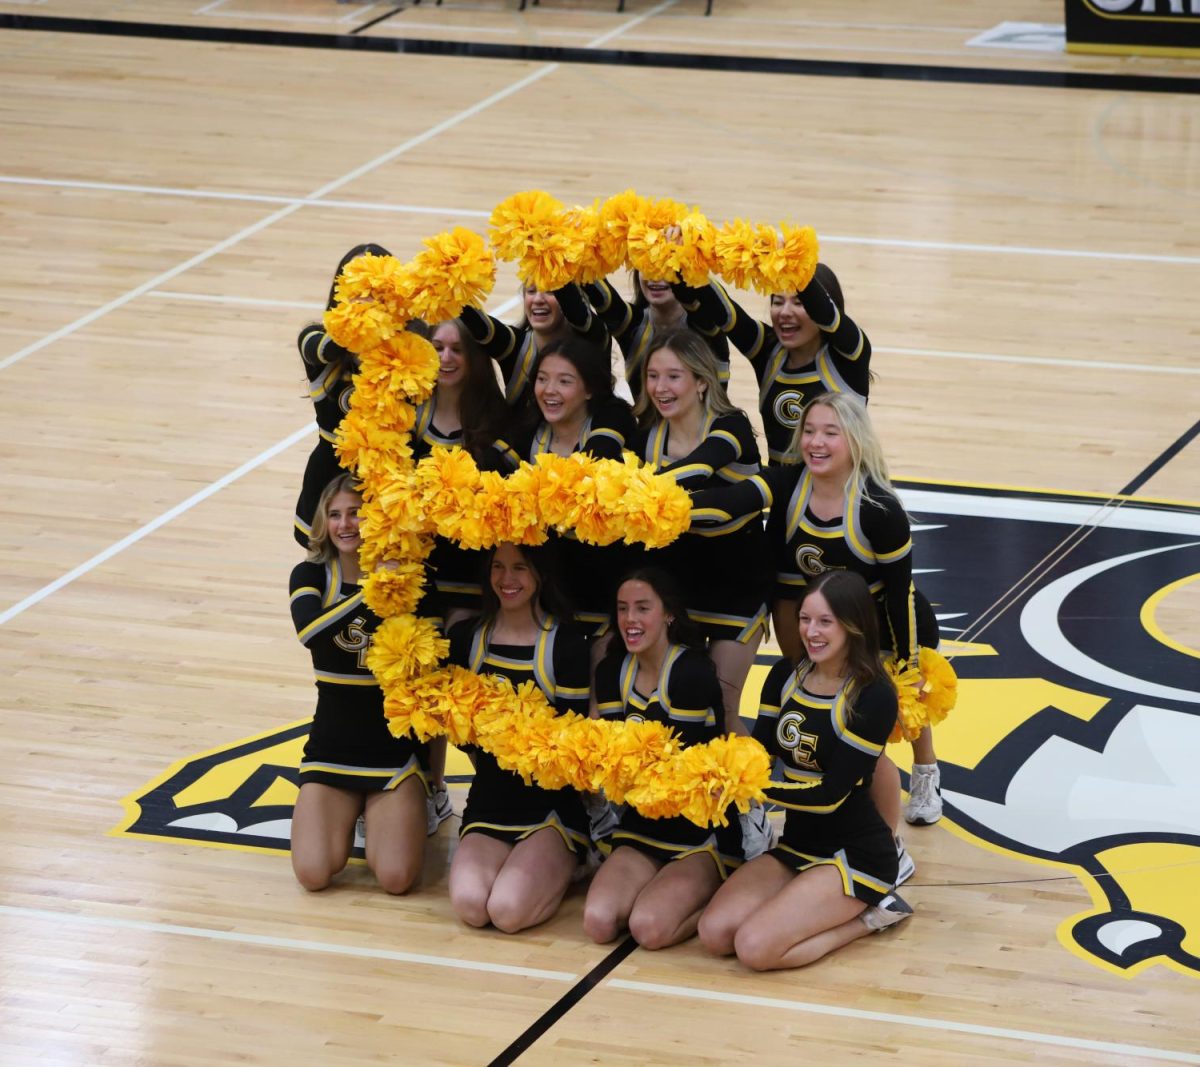 Making the E for East, the dance team performs their ritual.